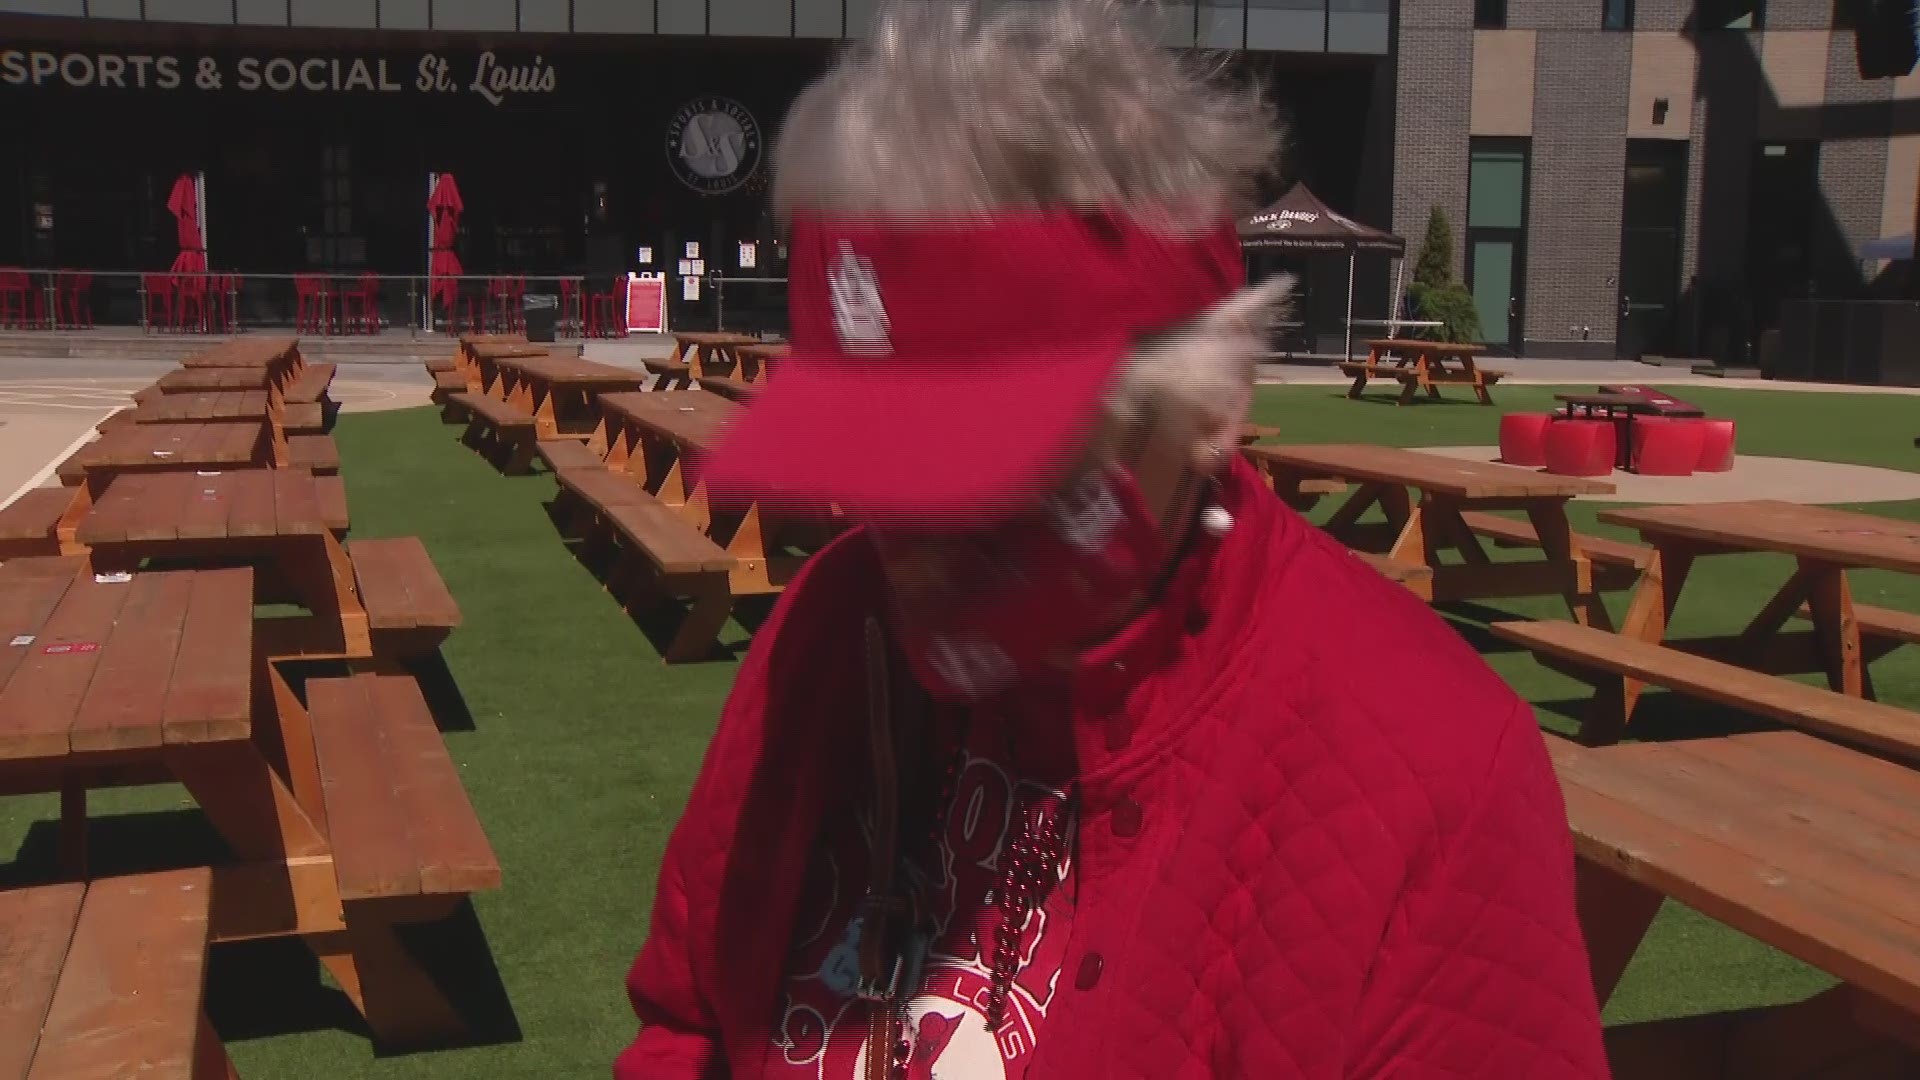 Cardinals super fan Jan Daniels carries on tradition attending 64th home opener in St. Louis